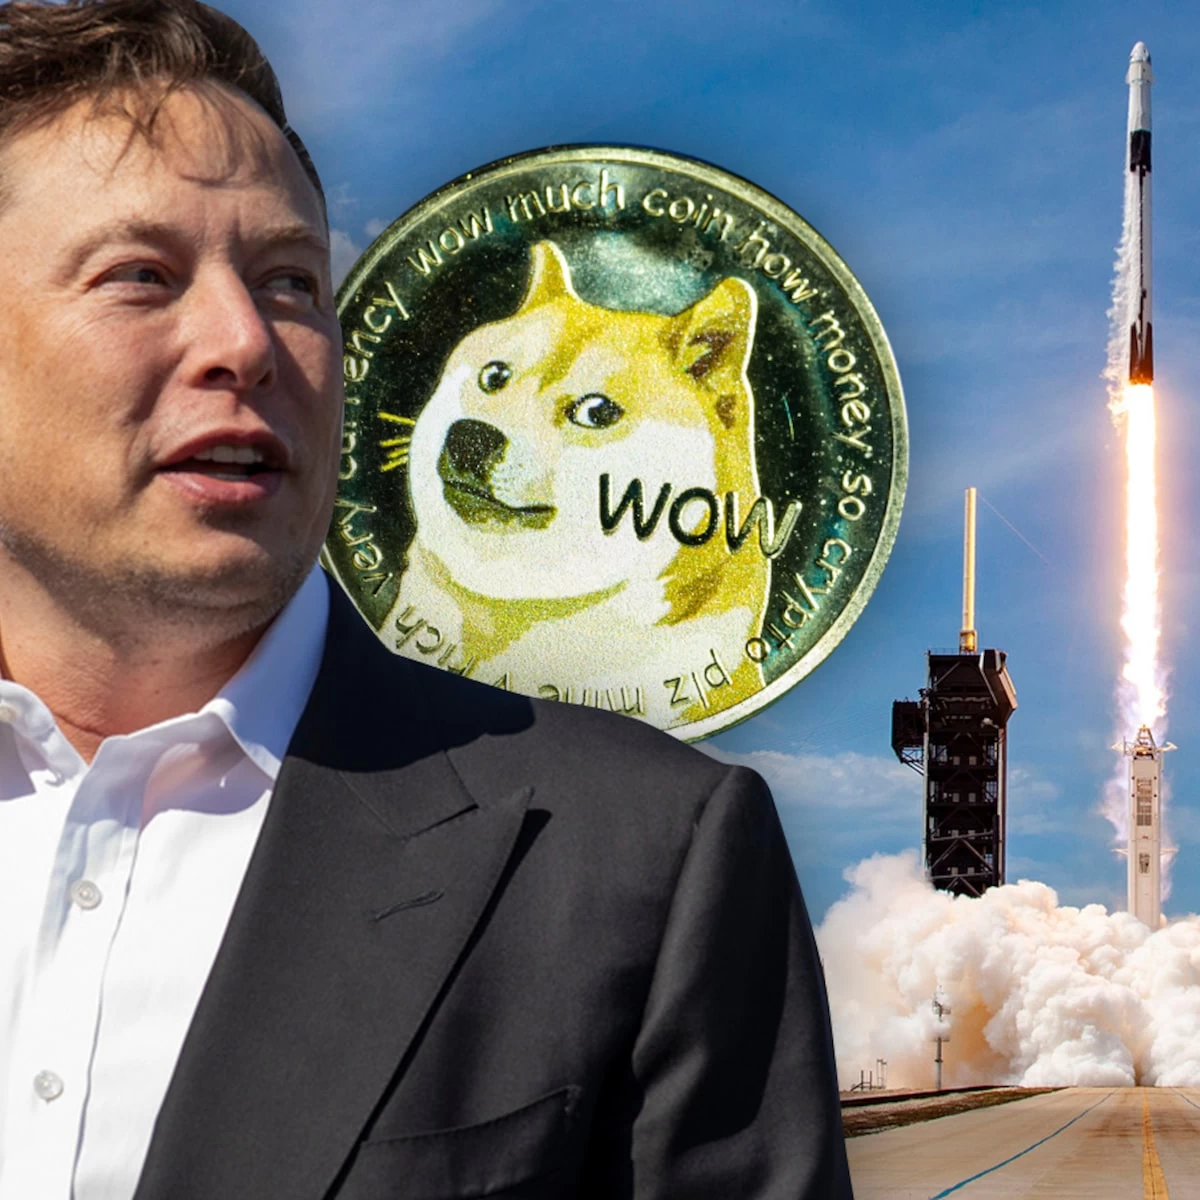 'Mission to Moon': SpaceX accepts dogecoin as payment to launch lunar mission in 2022